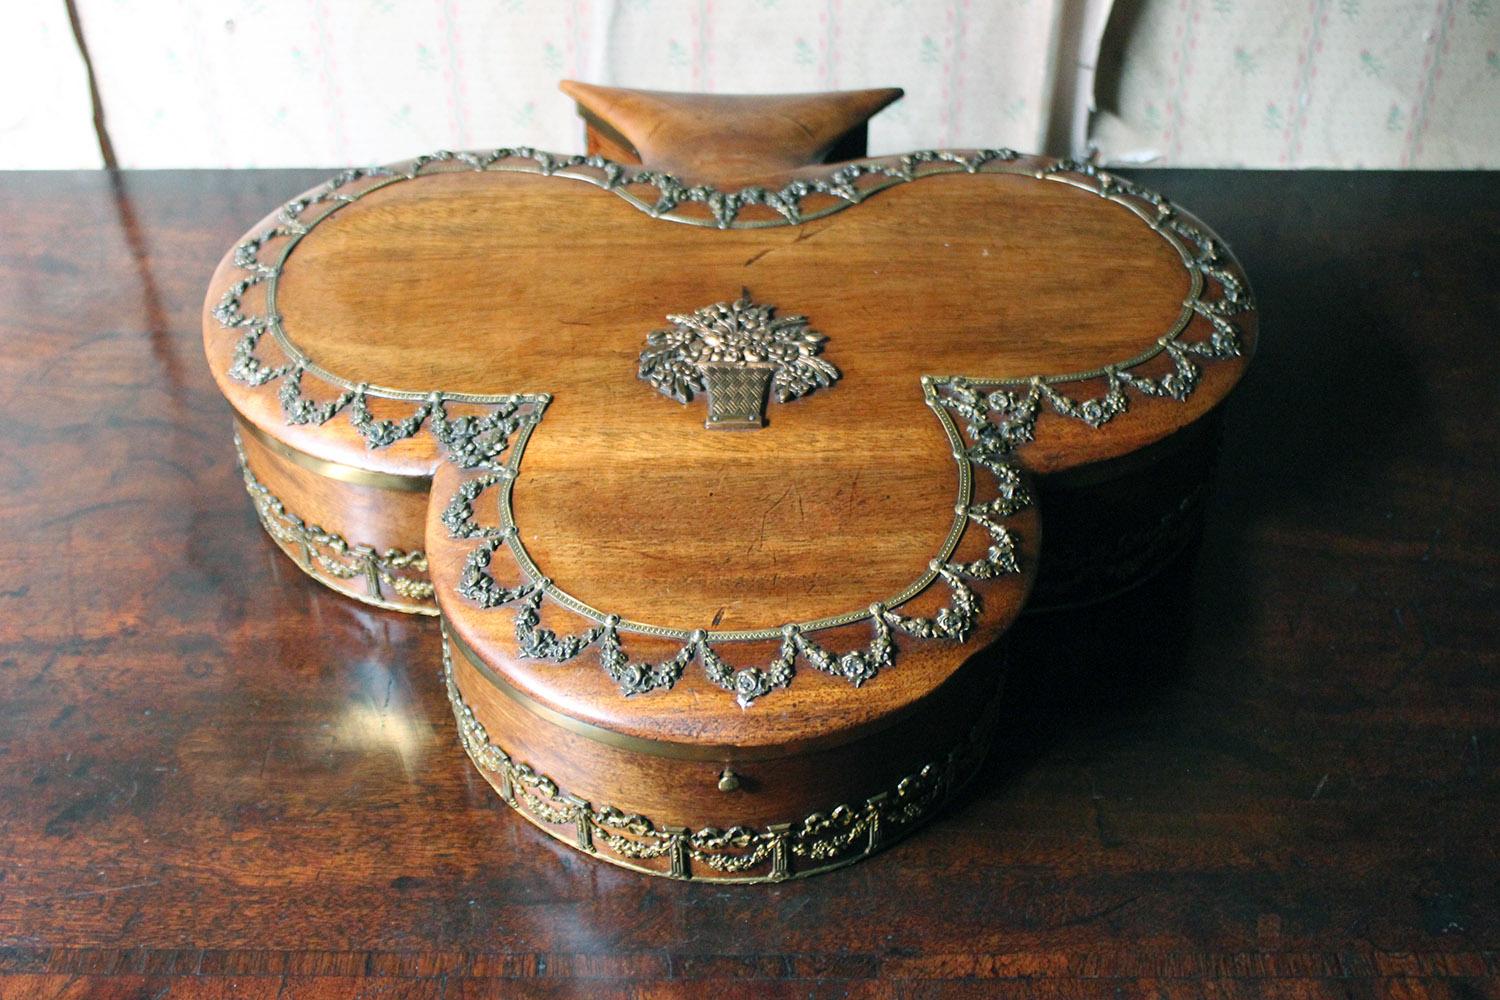 Northern Irish Unusual Mahogany and Brass Sewing Box Formed as a Clover, circa 1830